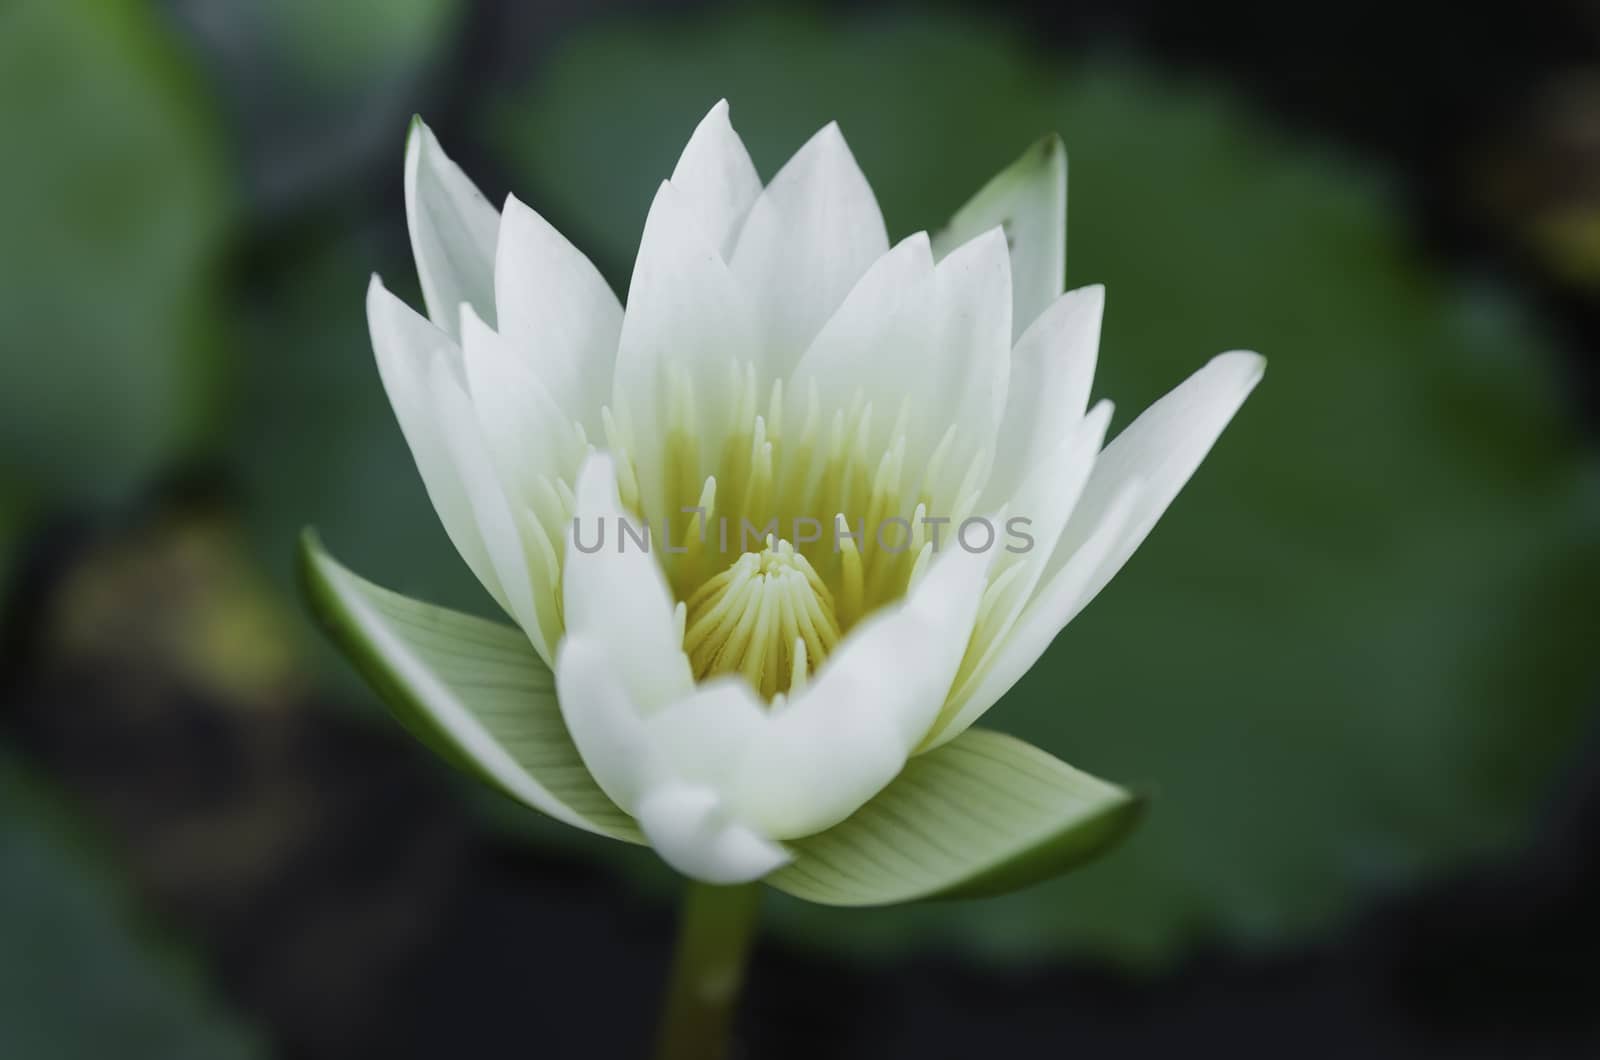 White lotus and green leaves in the pond